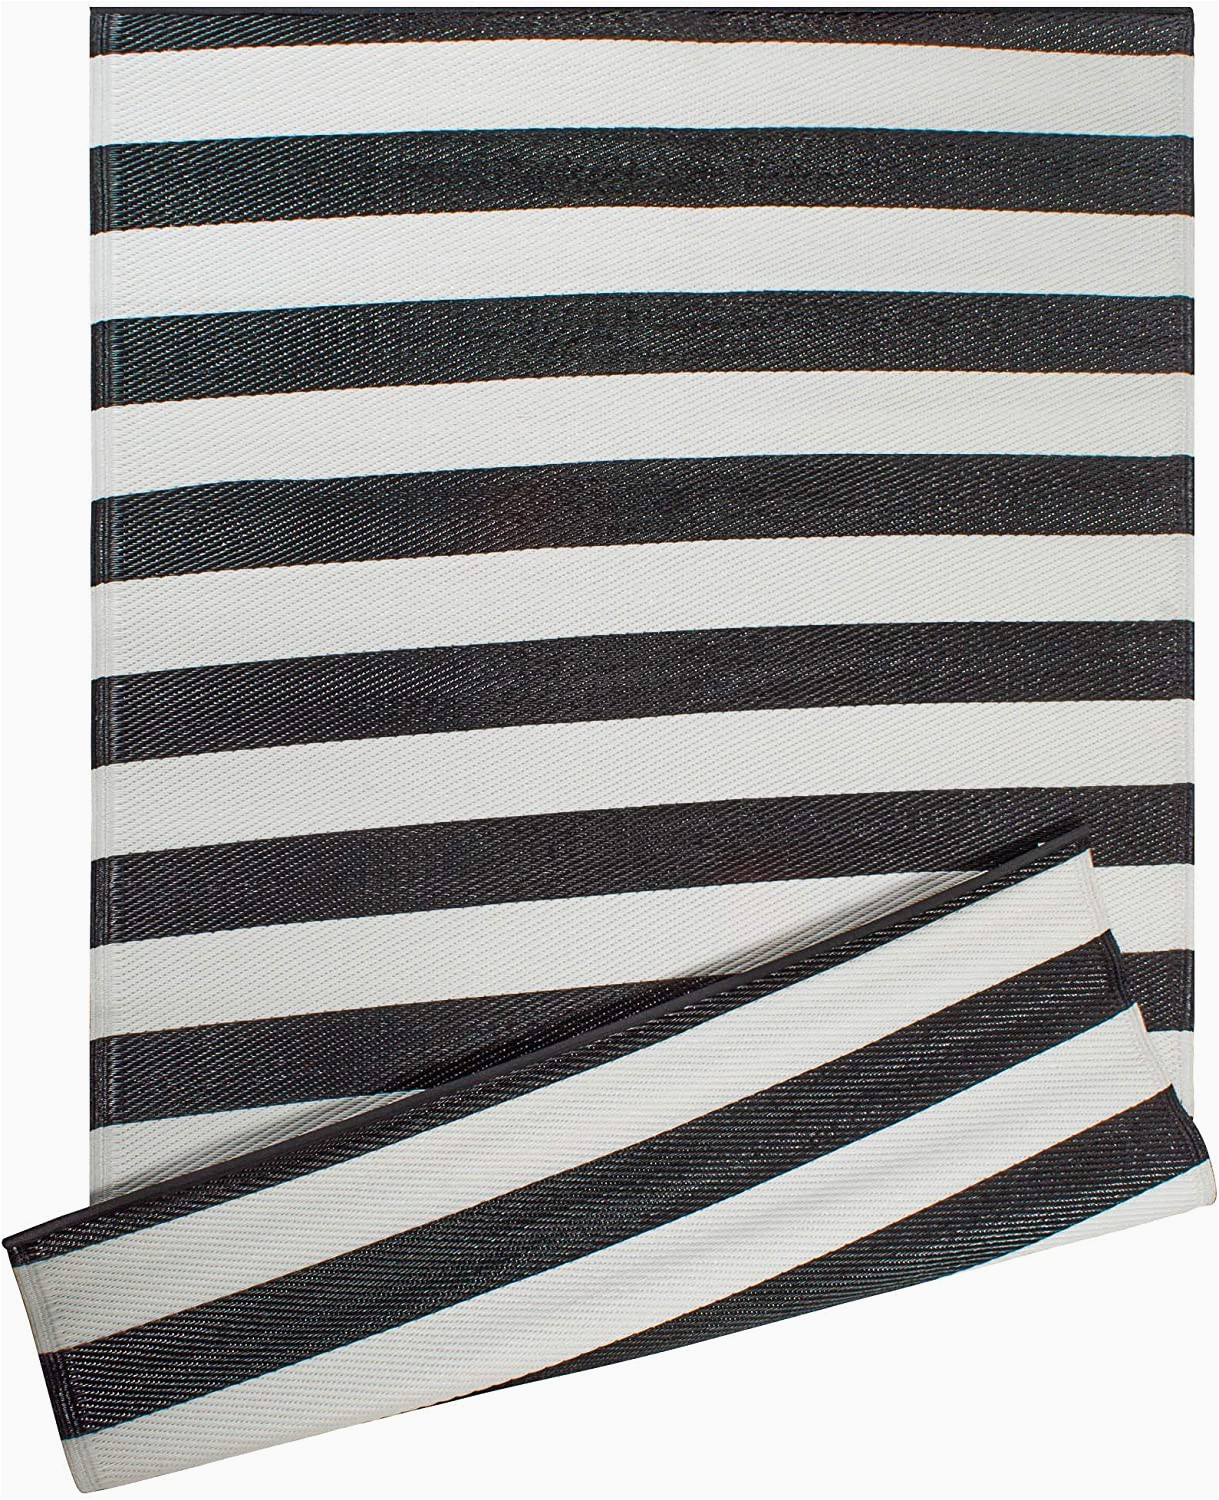 Grey and White Striped area Rug Dii Reversible Indoor Woven Striped Outdoor Rug 4×6 White & Black